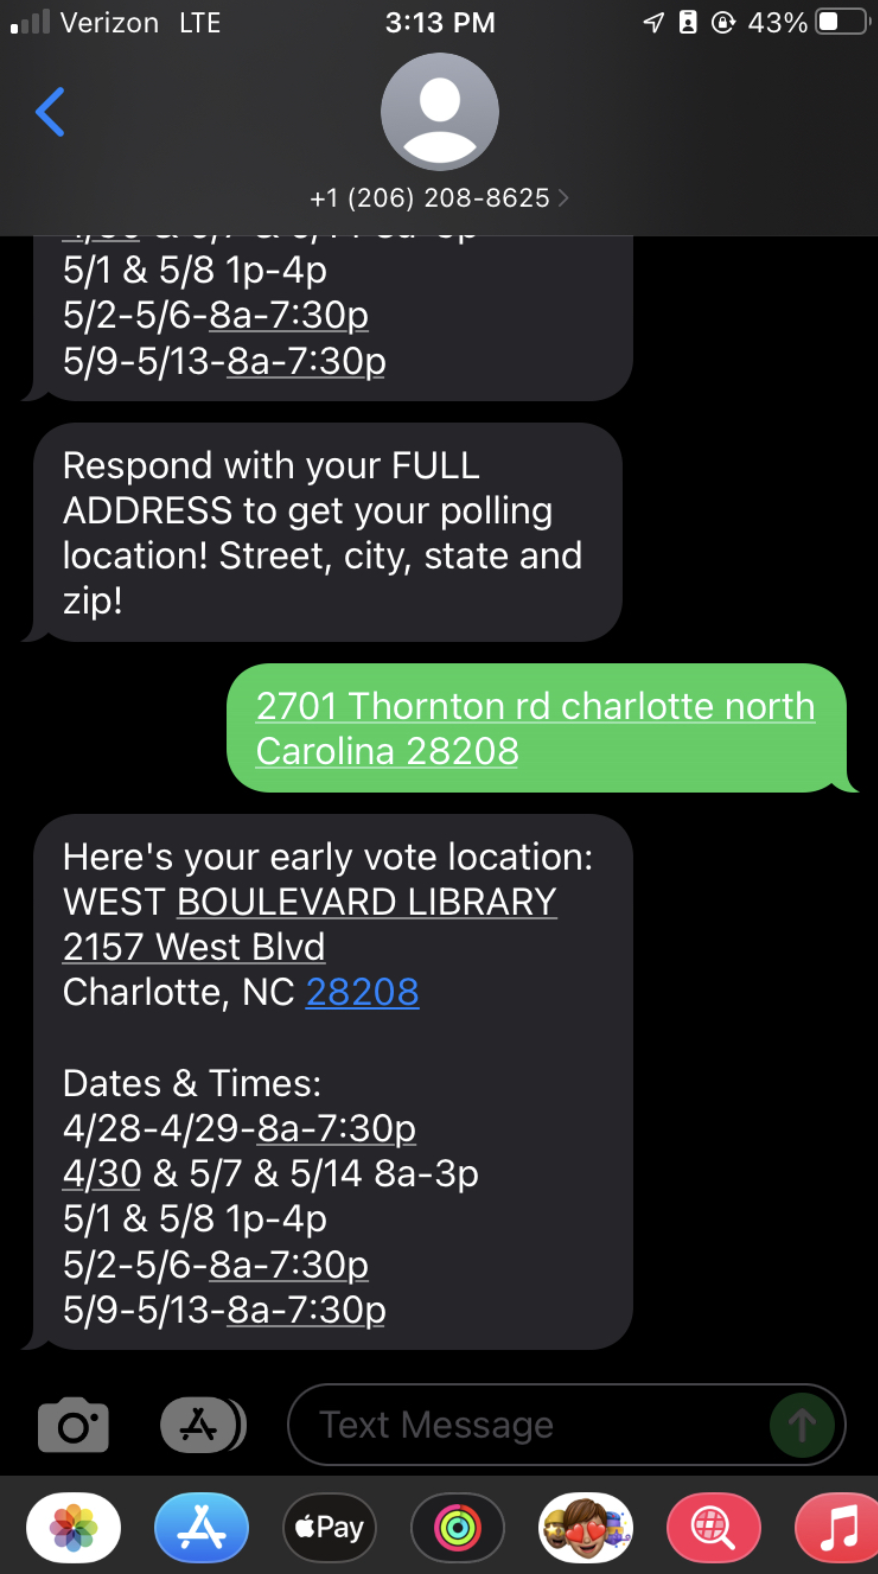 A screenshot of a mobile messaging conversation with the following exchange:
Ladder text: Respond with you FULL ADDRESS to get your polling location! Street, city, state and zip!
Response text: 2801 Thornton rd charlotte north Carolina 28208
Ladder text: Here's your early vote location: 
WEST BOULEVARD LIBRARY 
2157 West Blvd 
Charlotte, NC 28208

Dates & Times:
4/28-4/29-8a-7:30p
4/30 & 5/7 & 5/14 8a-3p
5/1 & 5/8 1p-4p
5/2-5/6-8a-7:30p
5/9-5/13-8a-7:30p